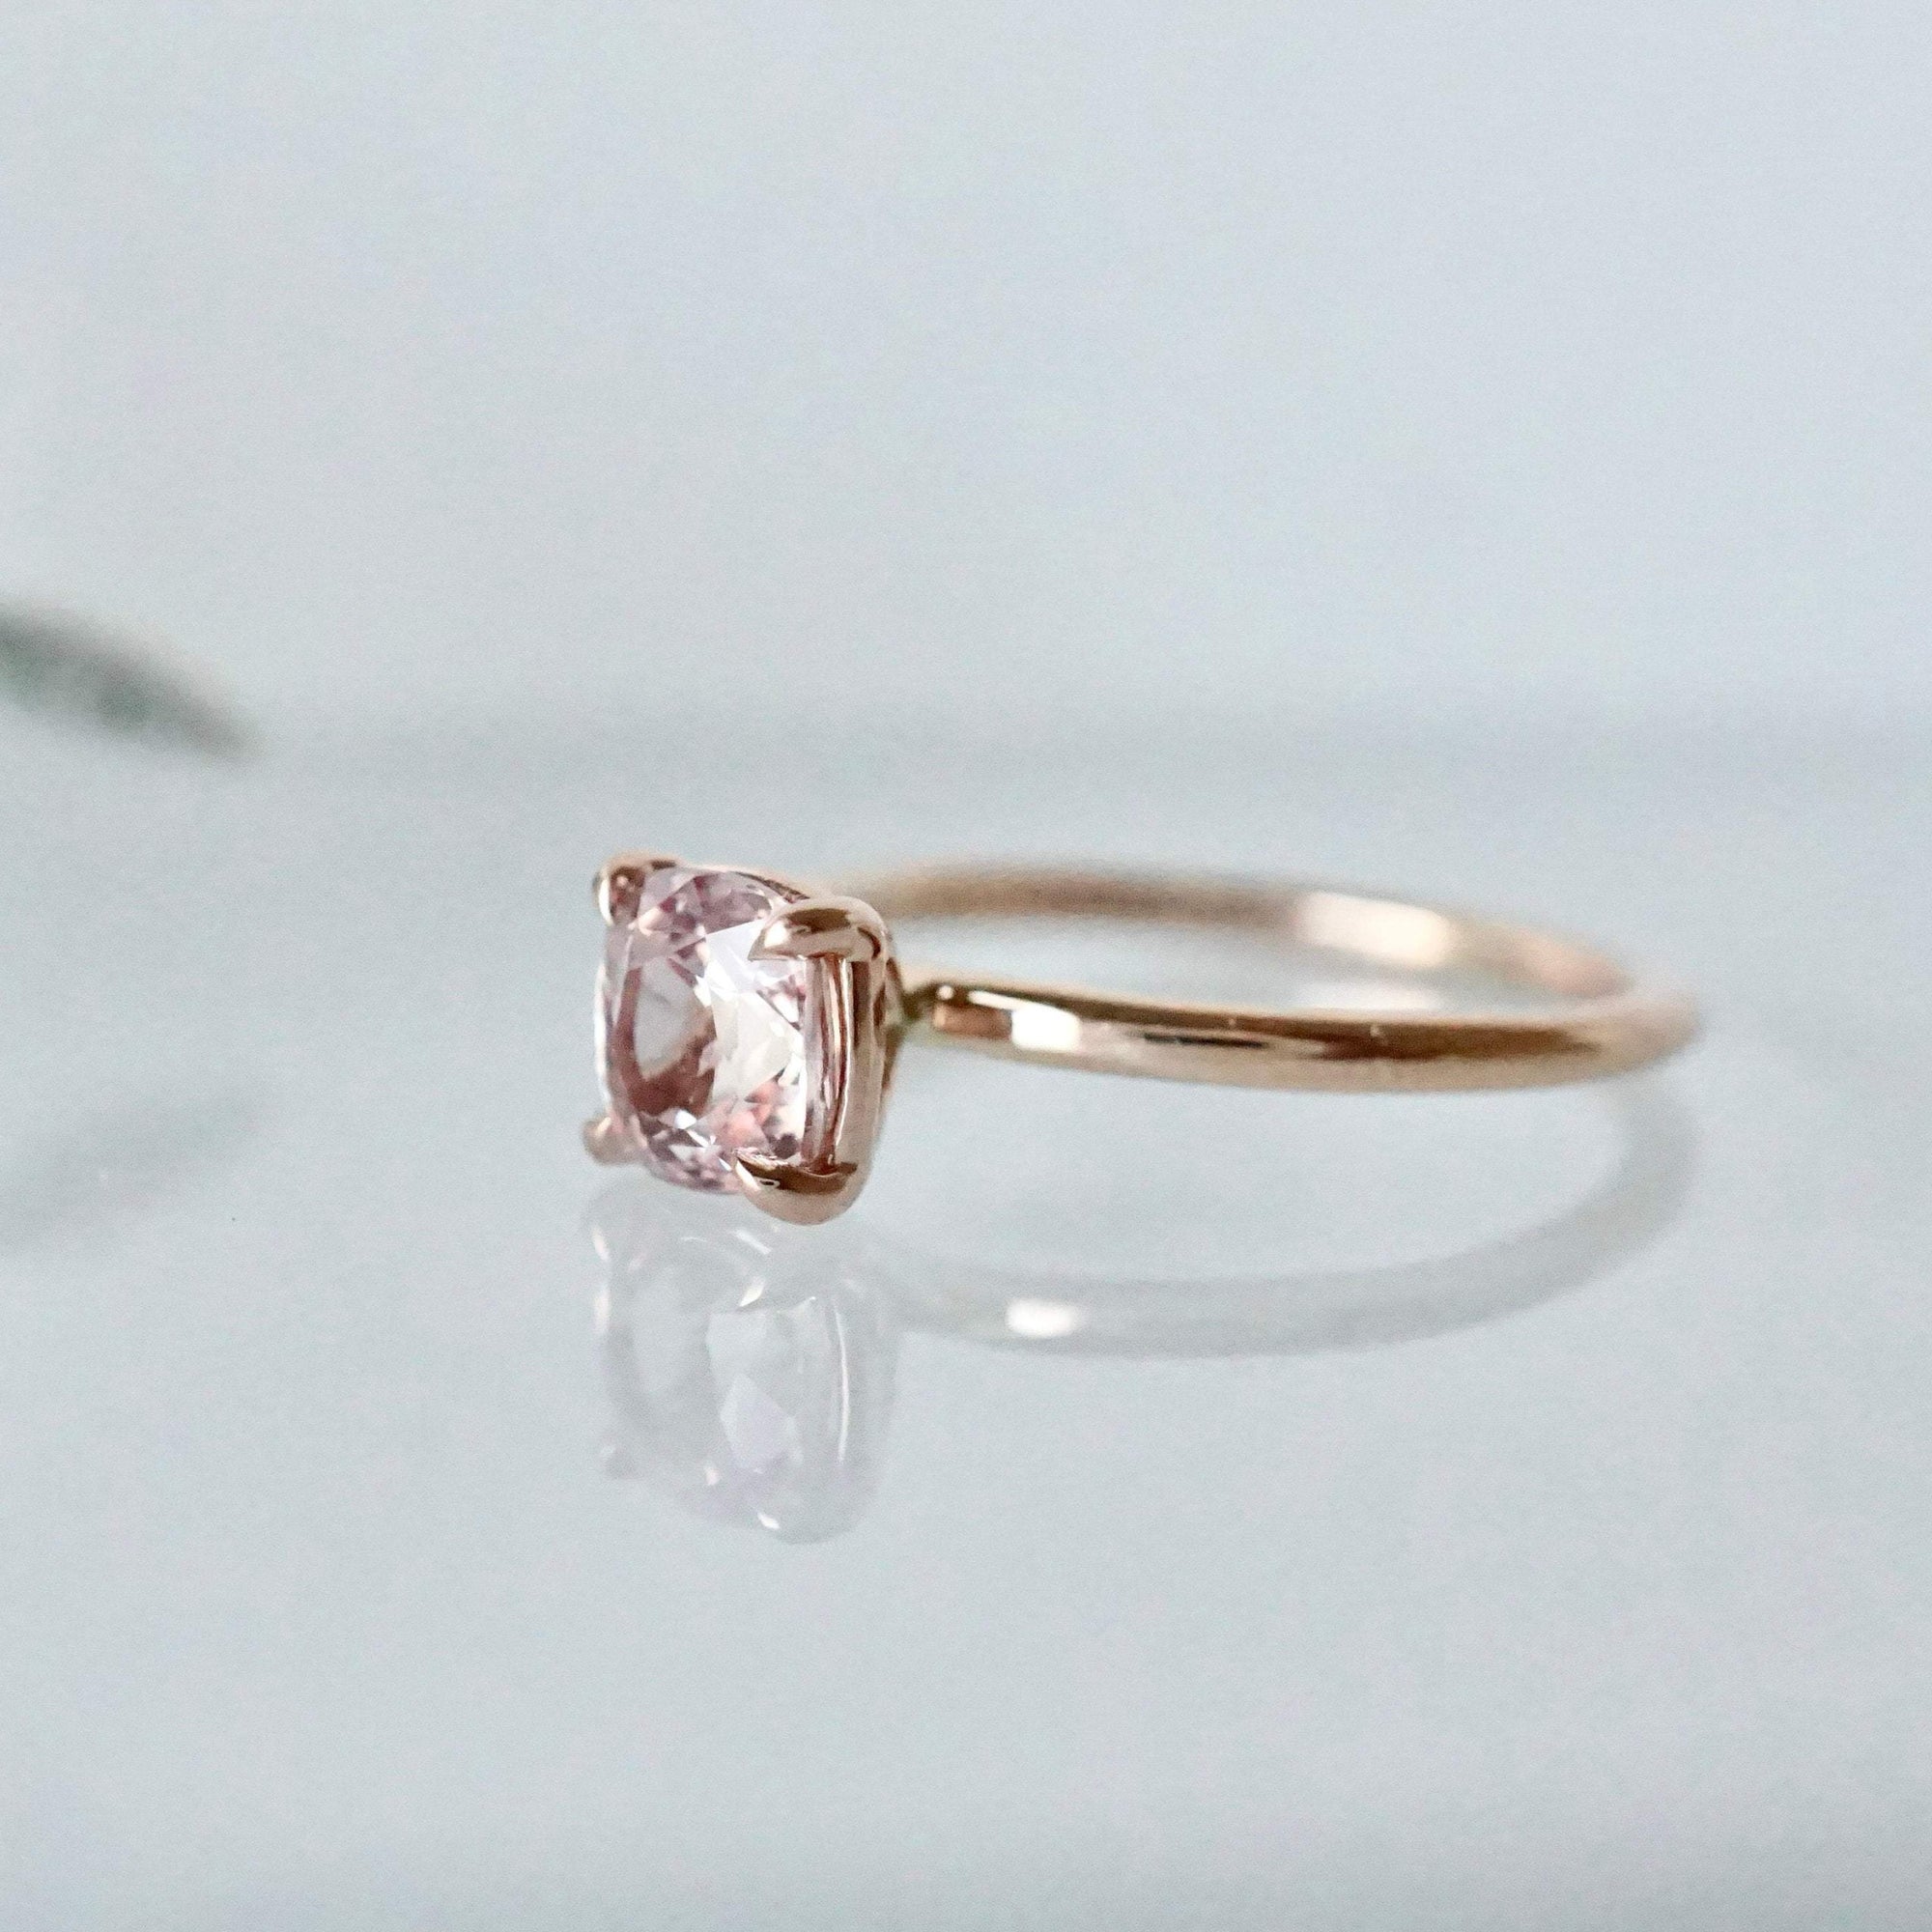 Cushion Cut Pink Sapphire Solitaire Engagement Ring 14K Rose Gold